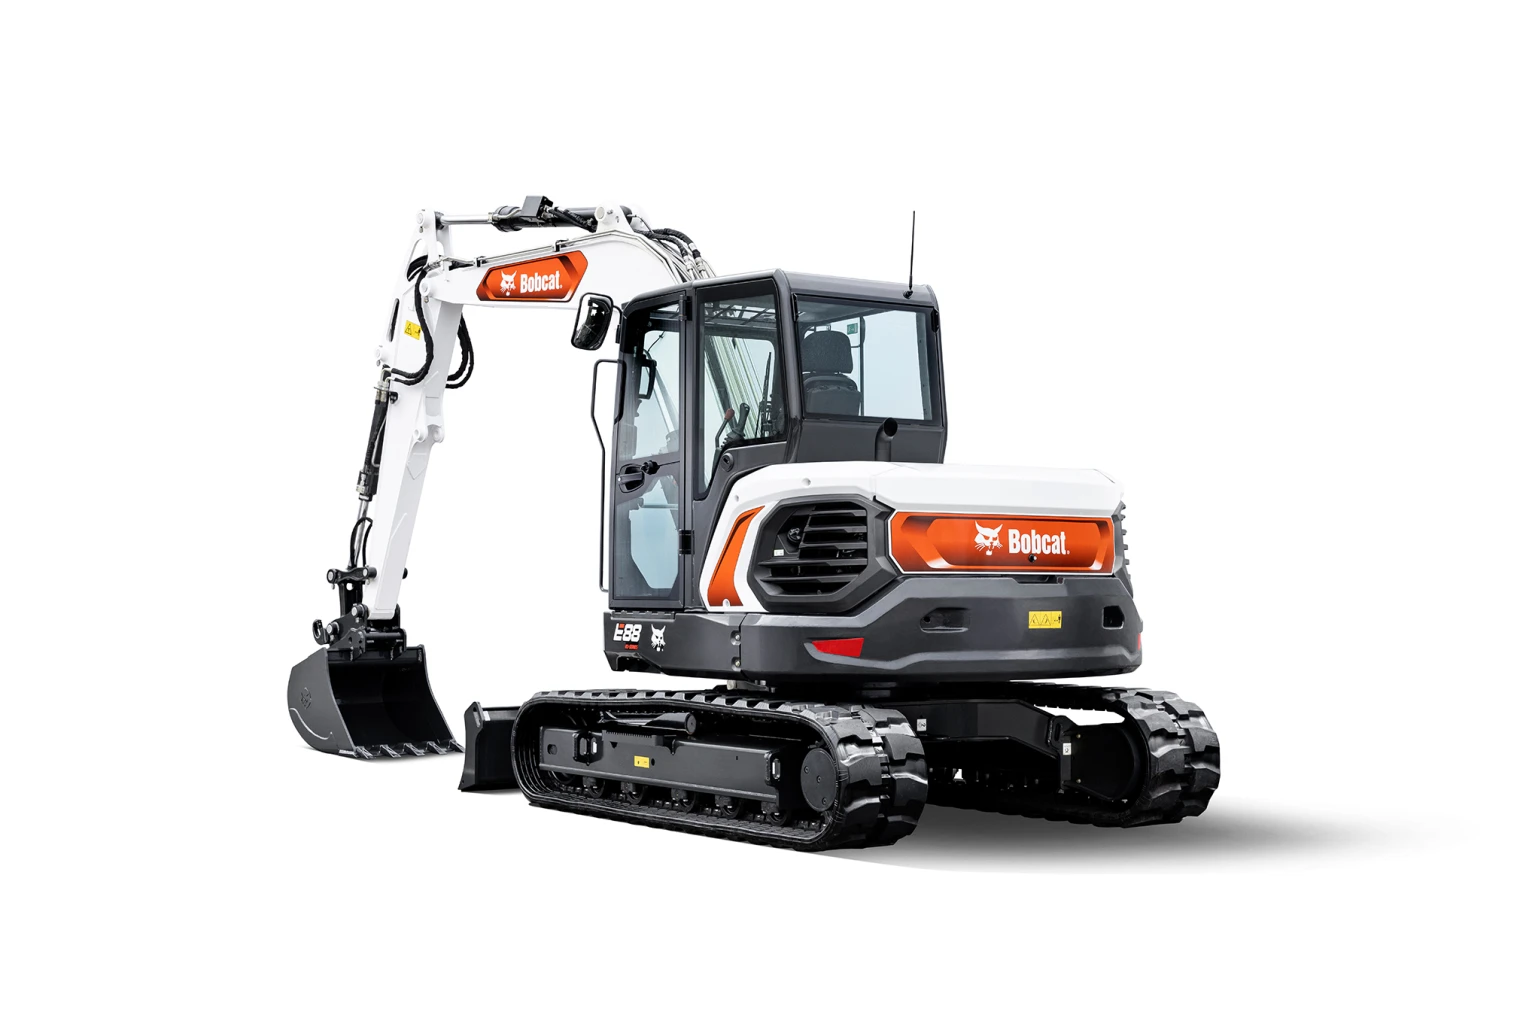 Browse Specs and more for the Bobcat E85 Compact Excavator - Bobcat of North Texas